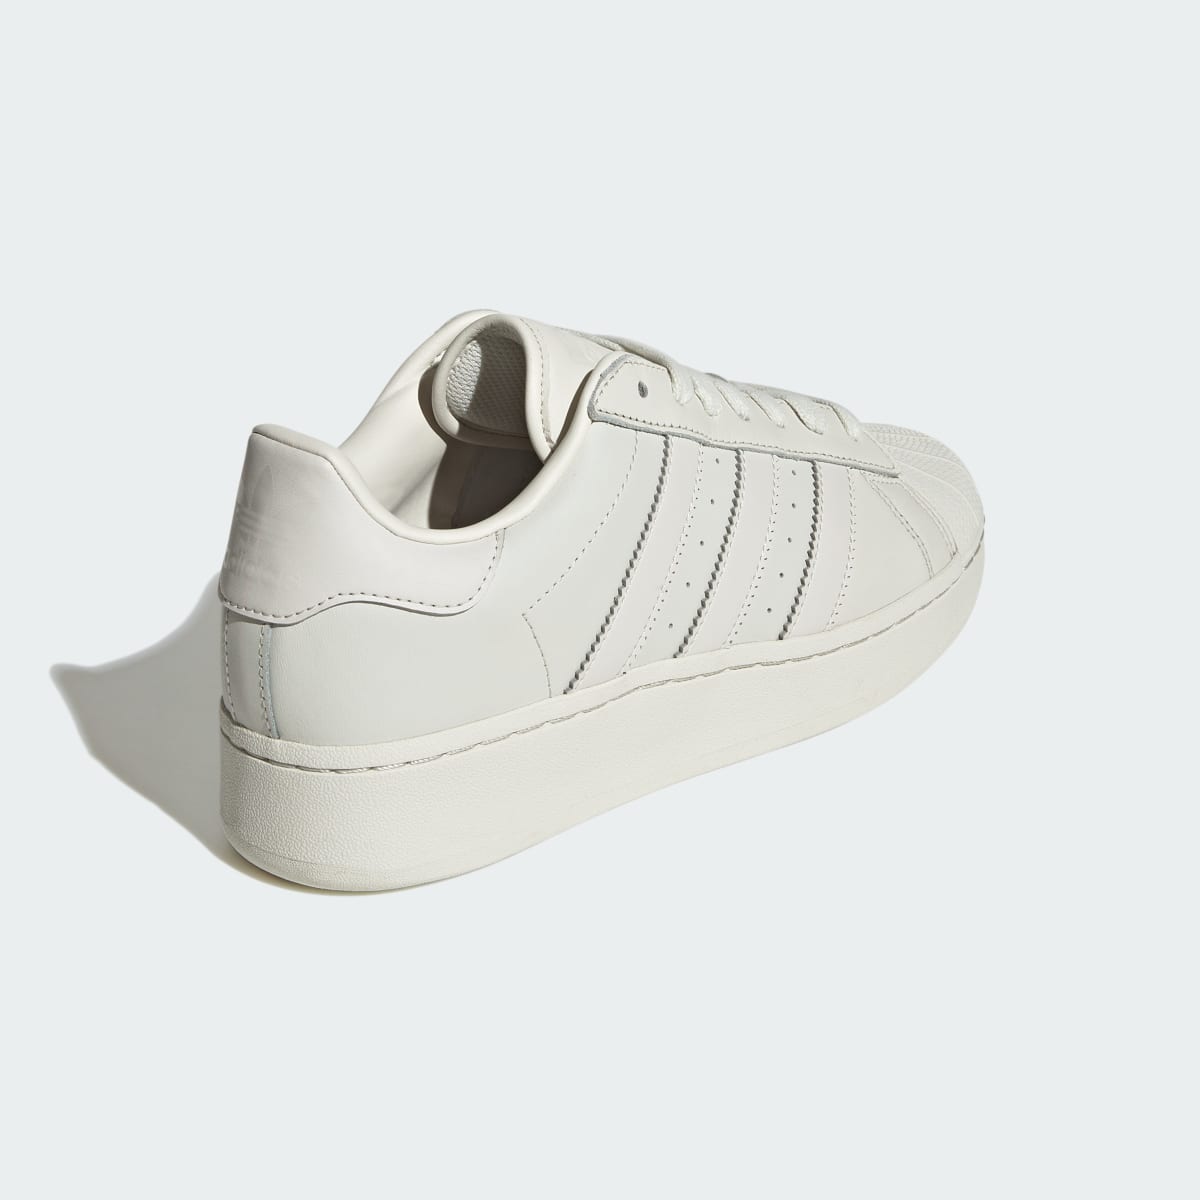 Adidas Superstar XLG Shoes. 6